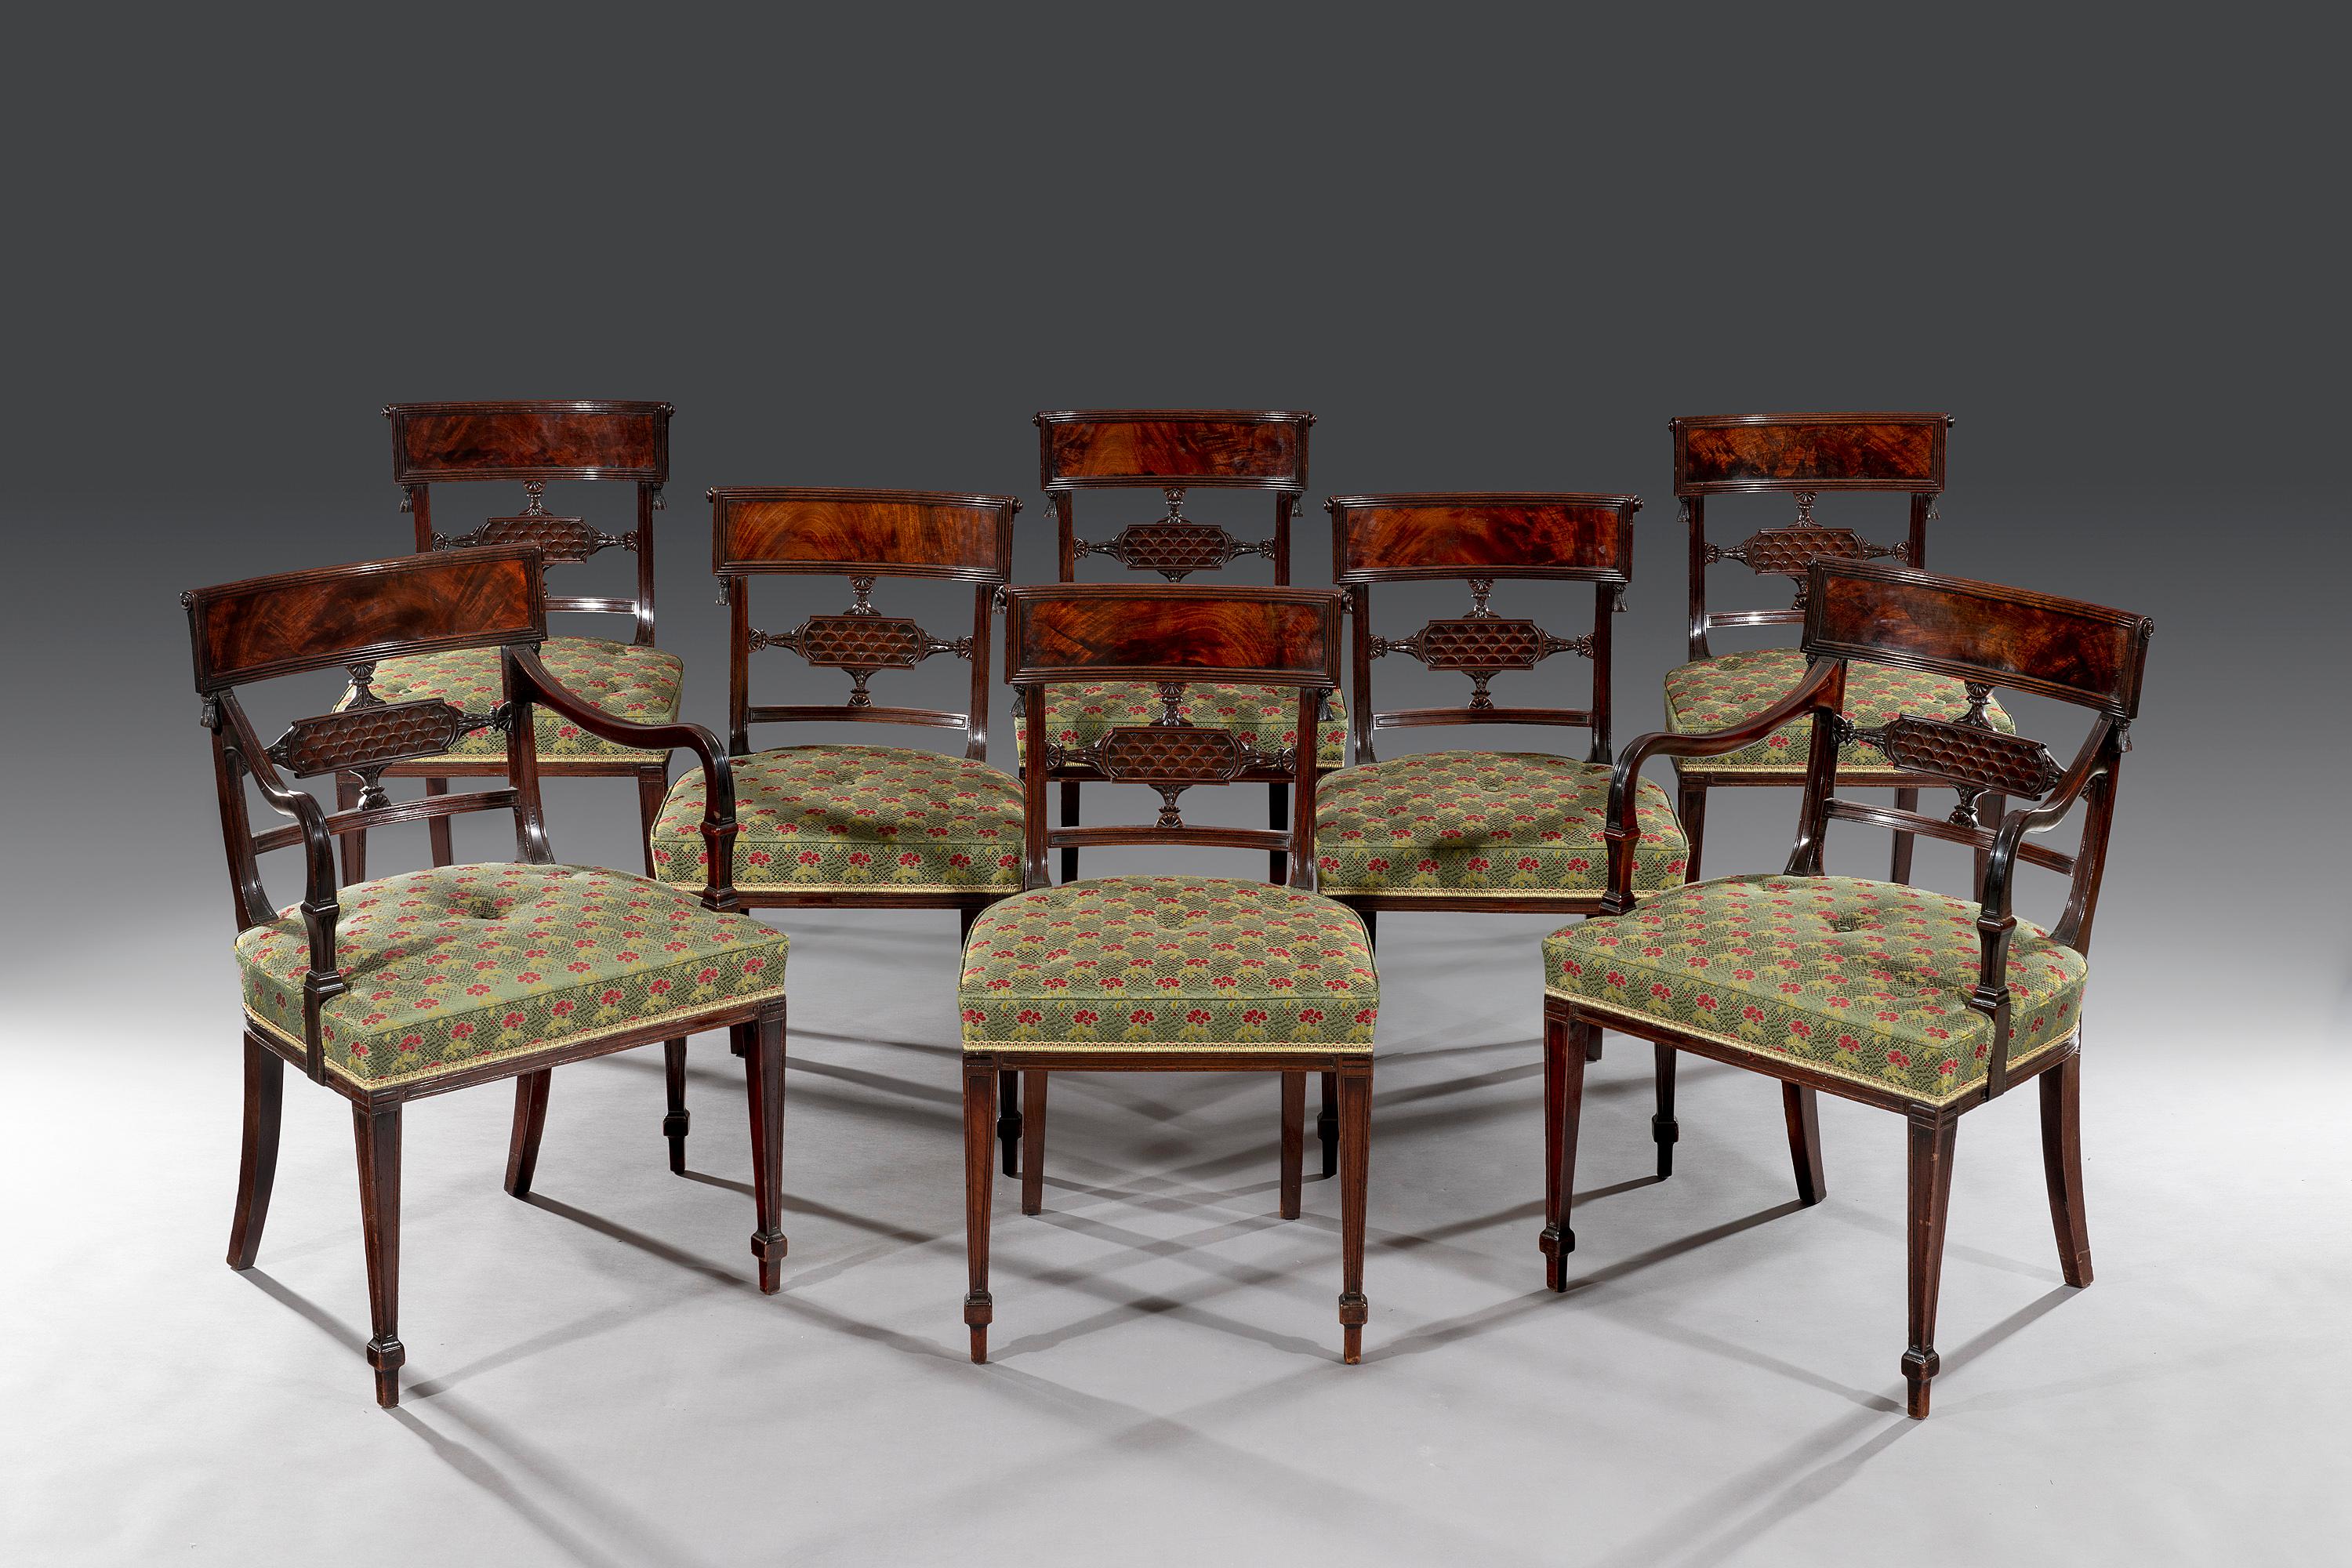 Fine Set of Eight George III Sheraton Period 18th Century Carved Mahogany Dining Chairs

The dining chairs are of the highest quality and design with each of the chairs made with highly figured mahogany veneered headrails. above a crisply carved